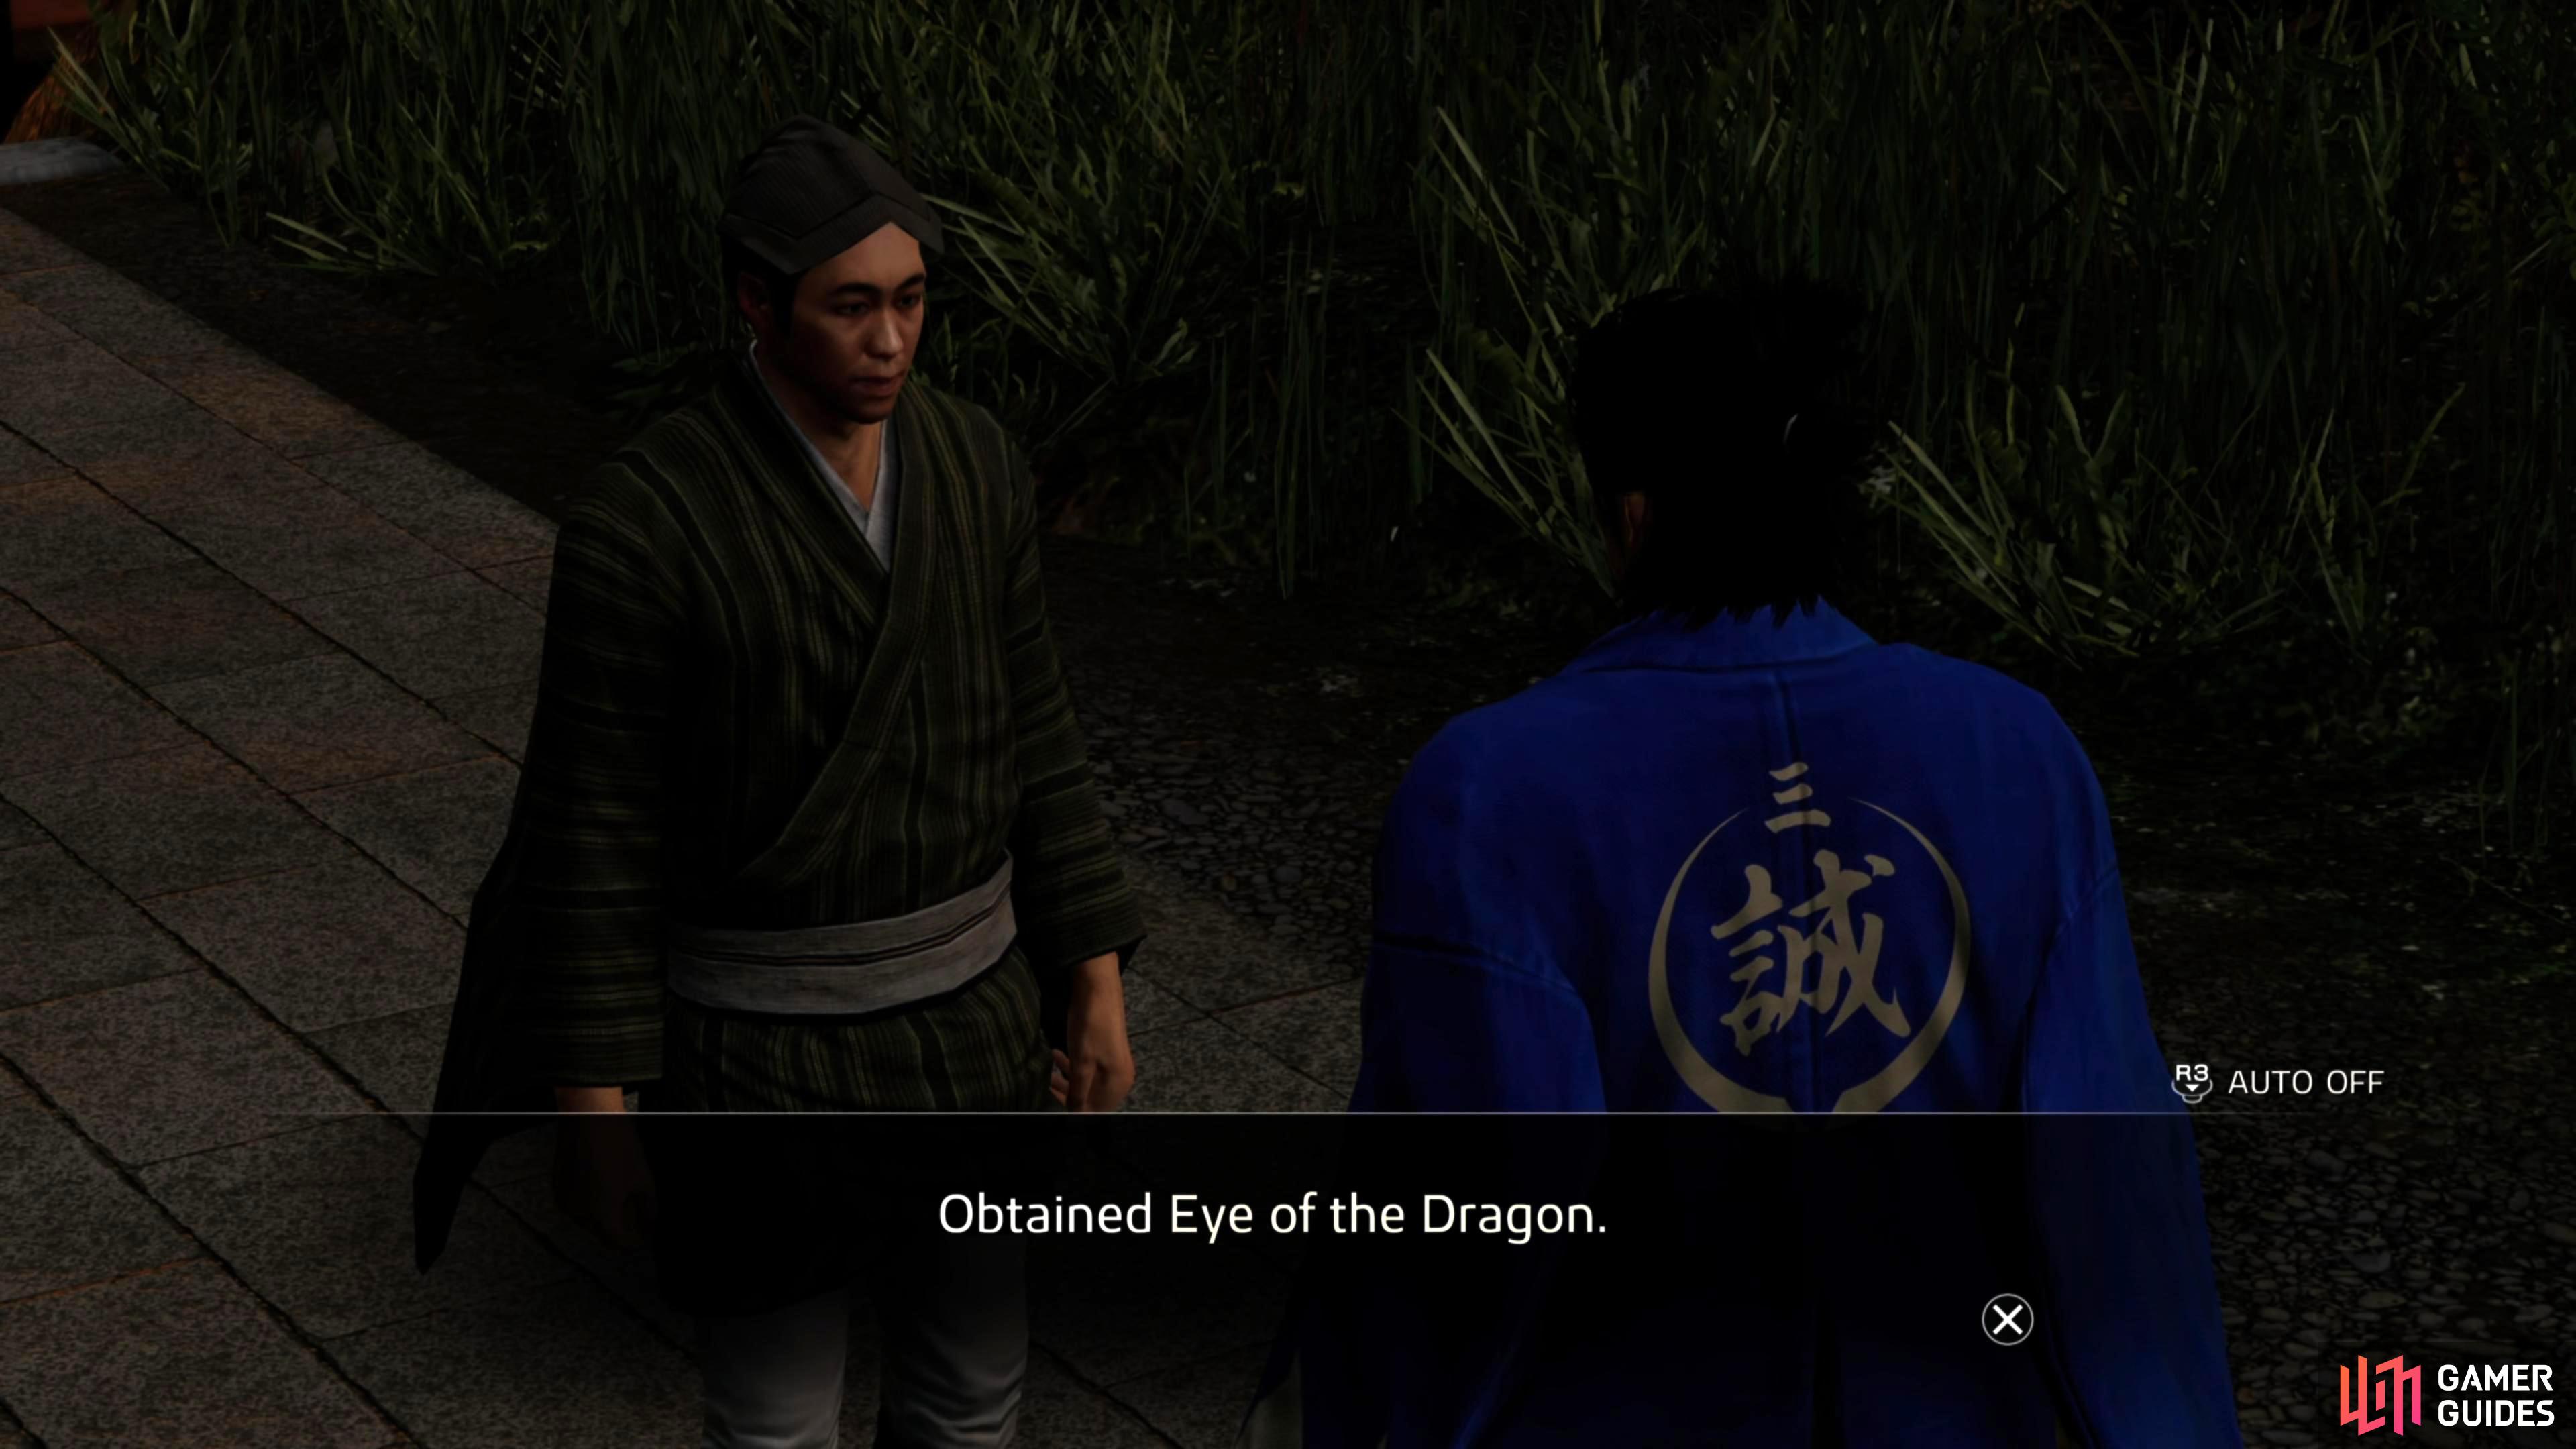 The Kawaraban Vendor will reward you with an Eye of the Dragon after completing his interview.